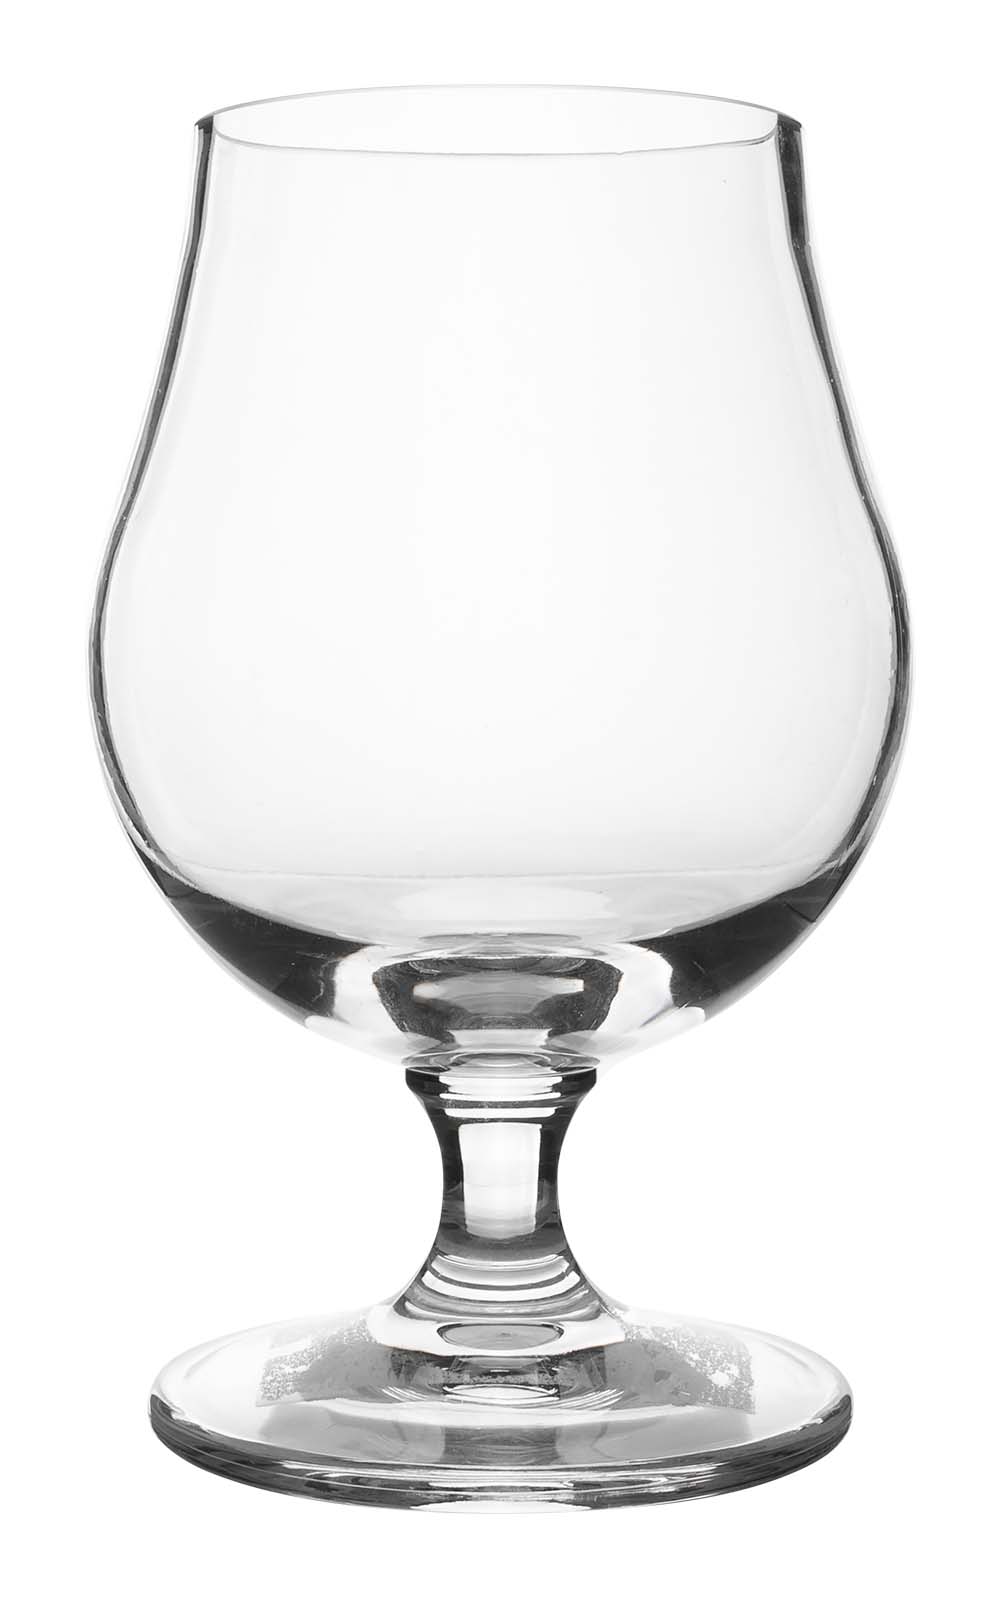 6101415 An elegant specialty beer glass constructed from plastic, providing scratch resistance and a featherlight quality. Additionally, it can be safely cleaned in the dishwasher and is free from BPA.